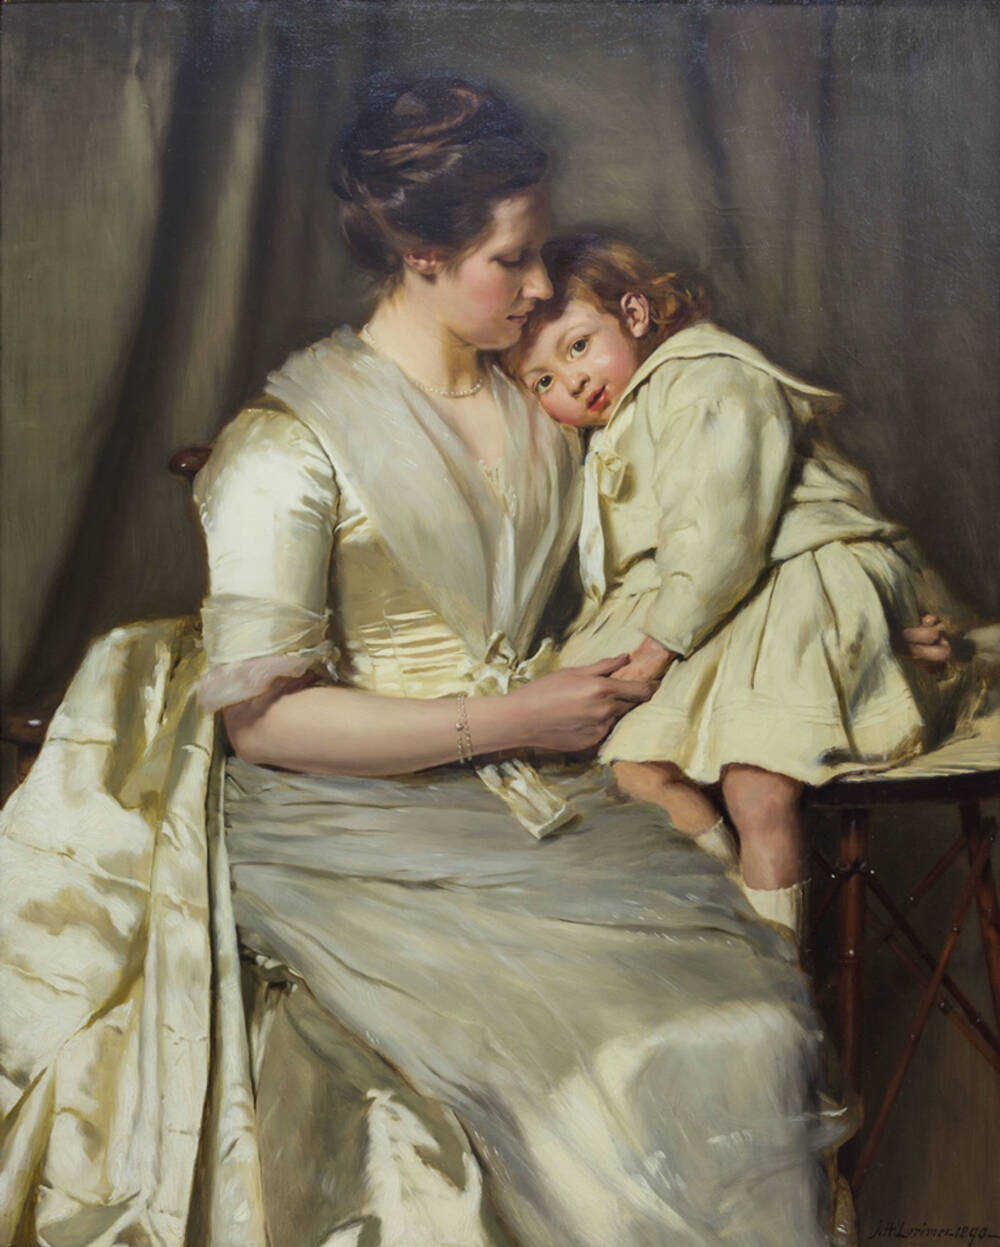 Painting of a woman and child.